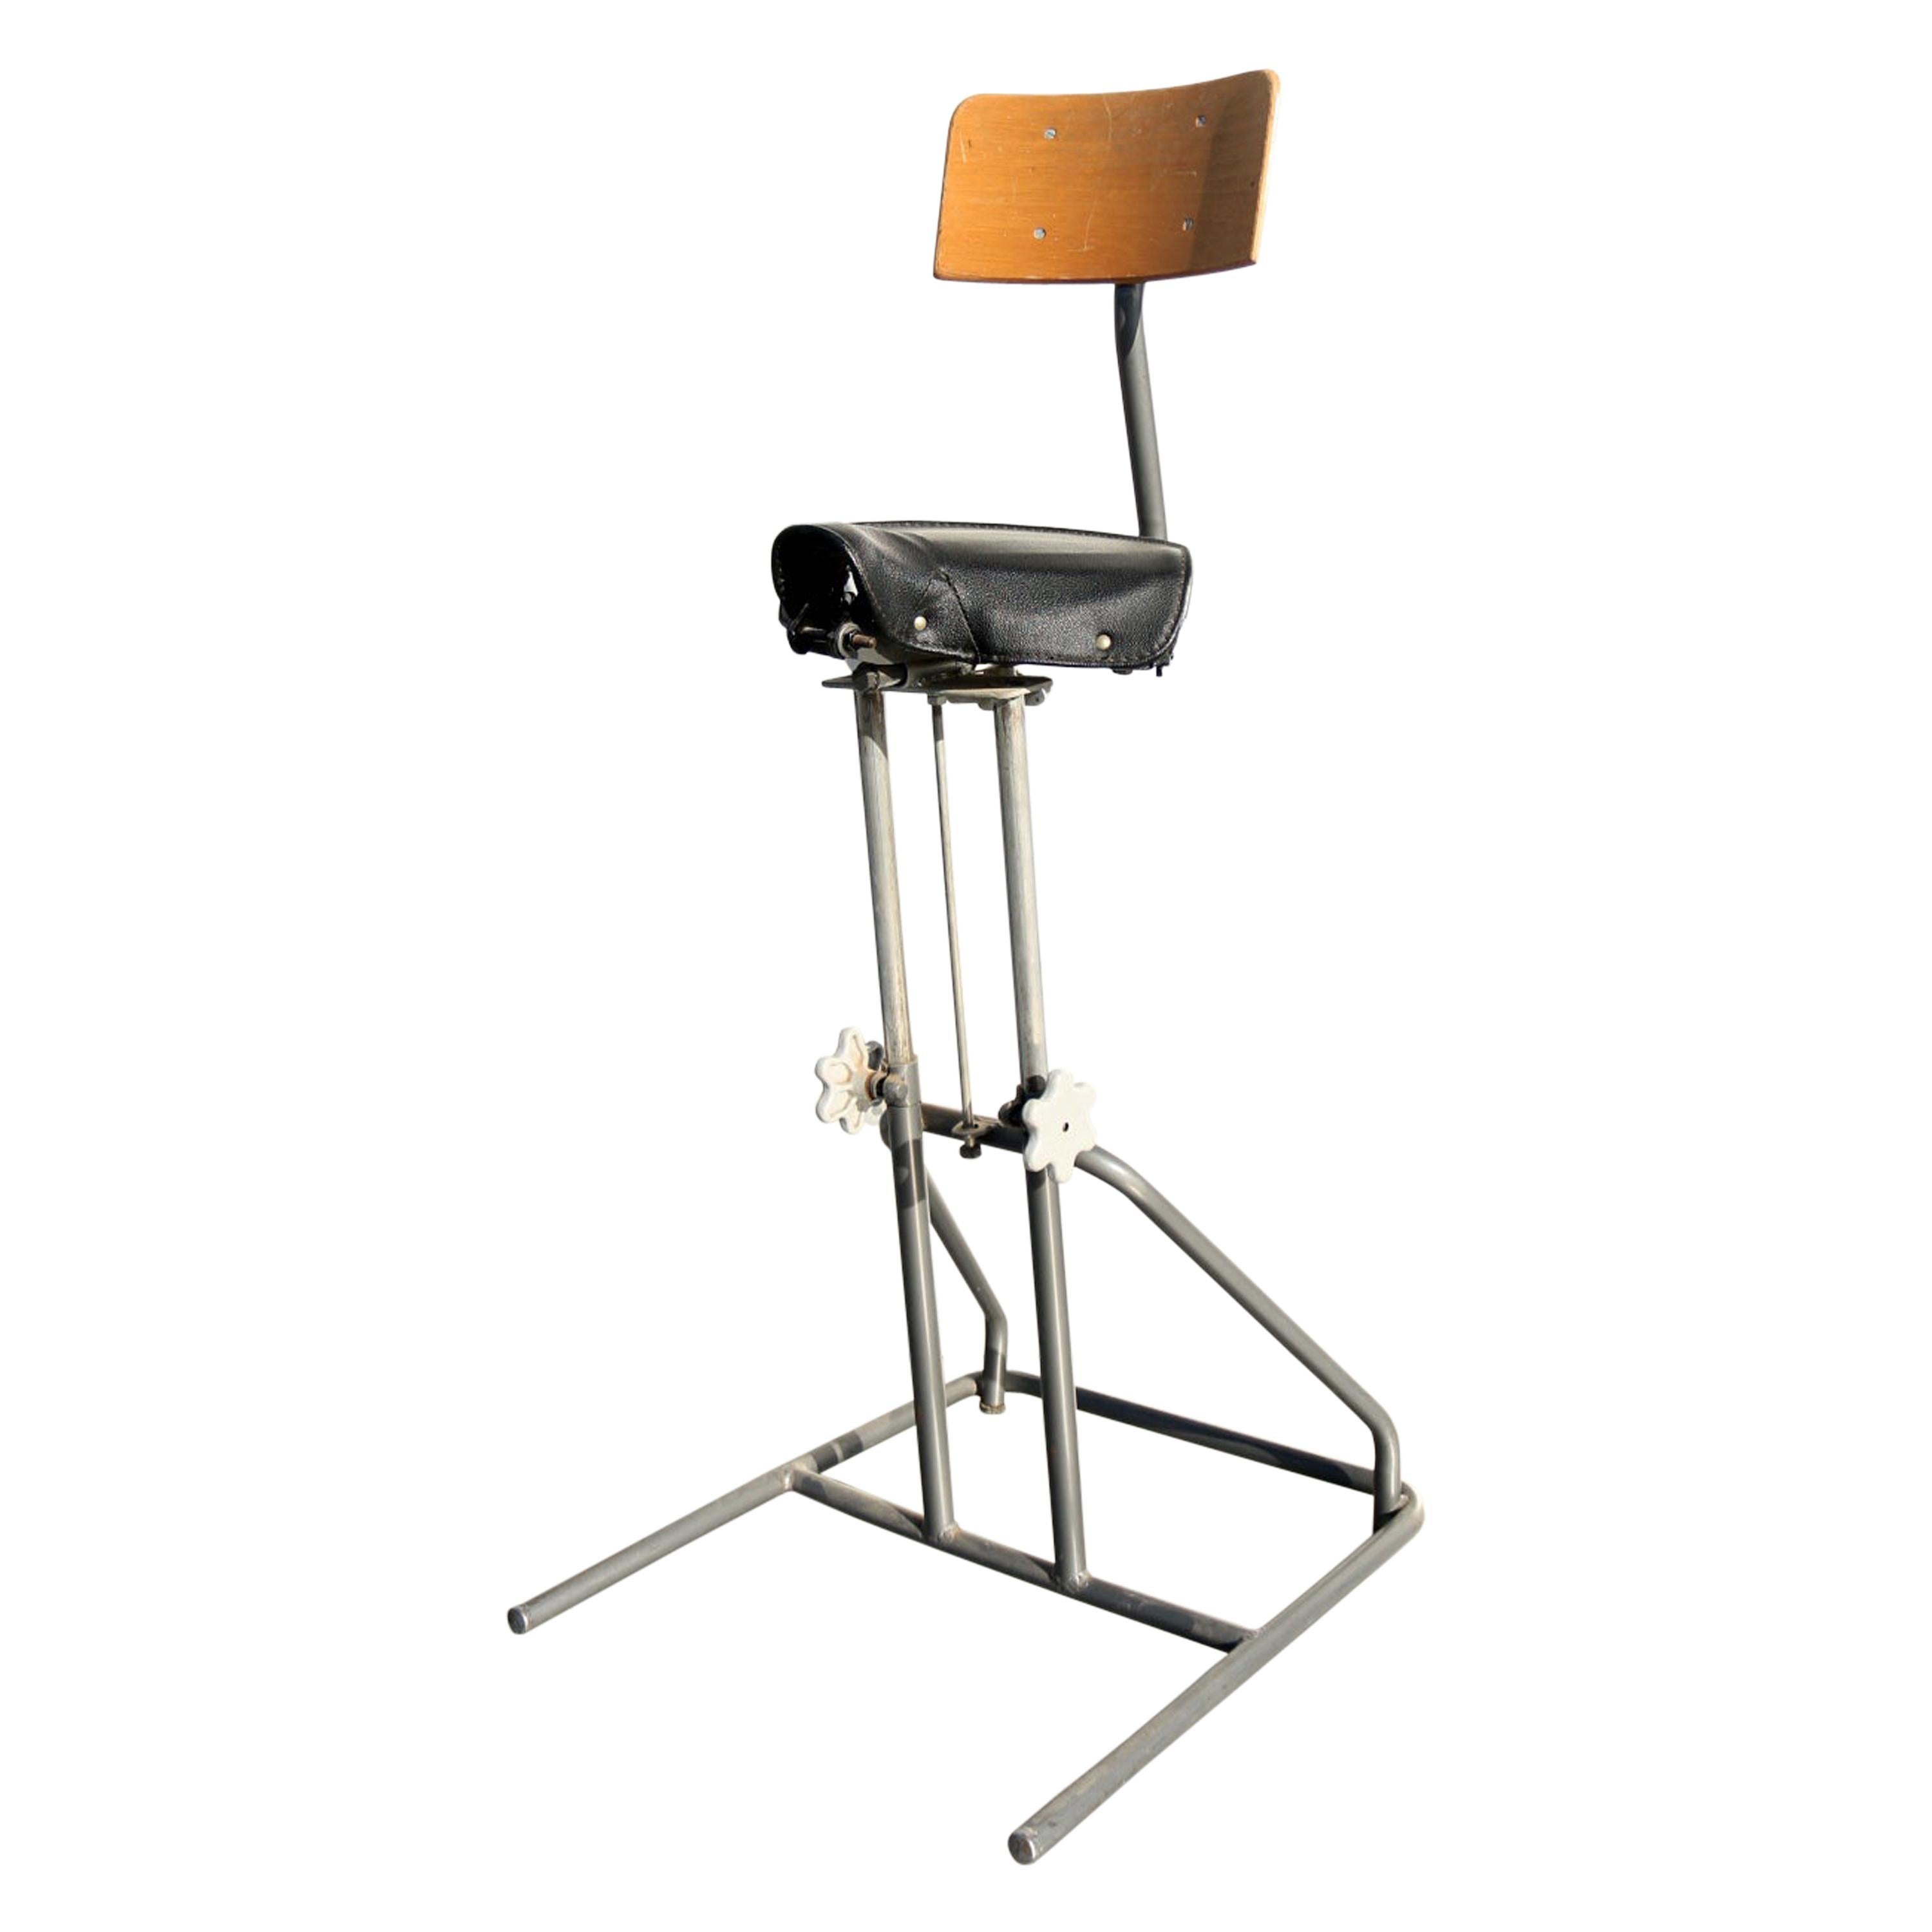 Industrial Design, Wrights Bicycle Seat, Stool, Studio Chair